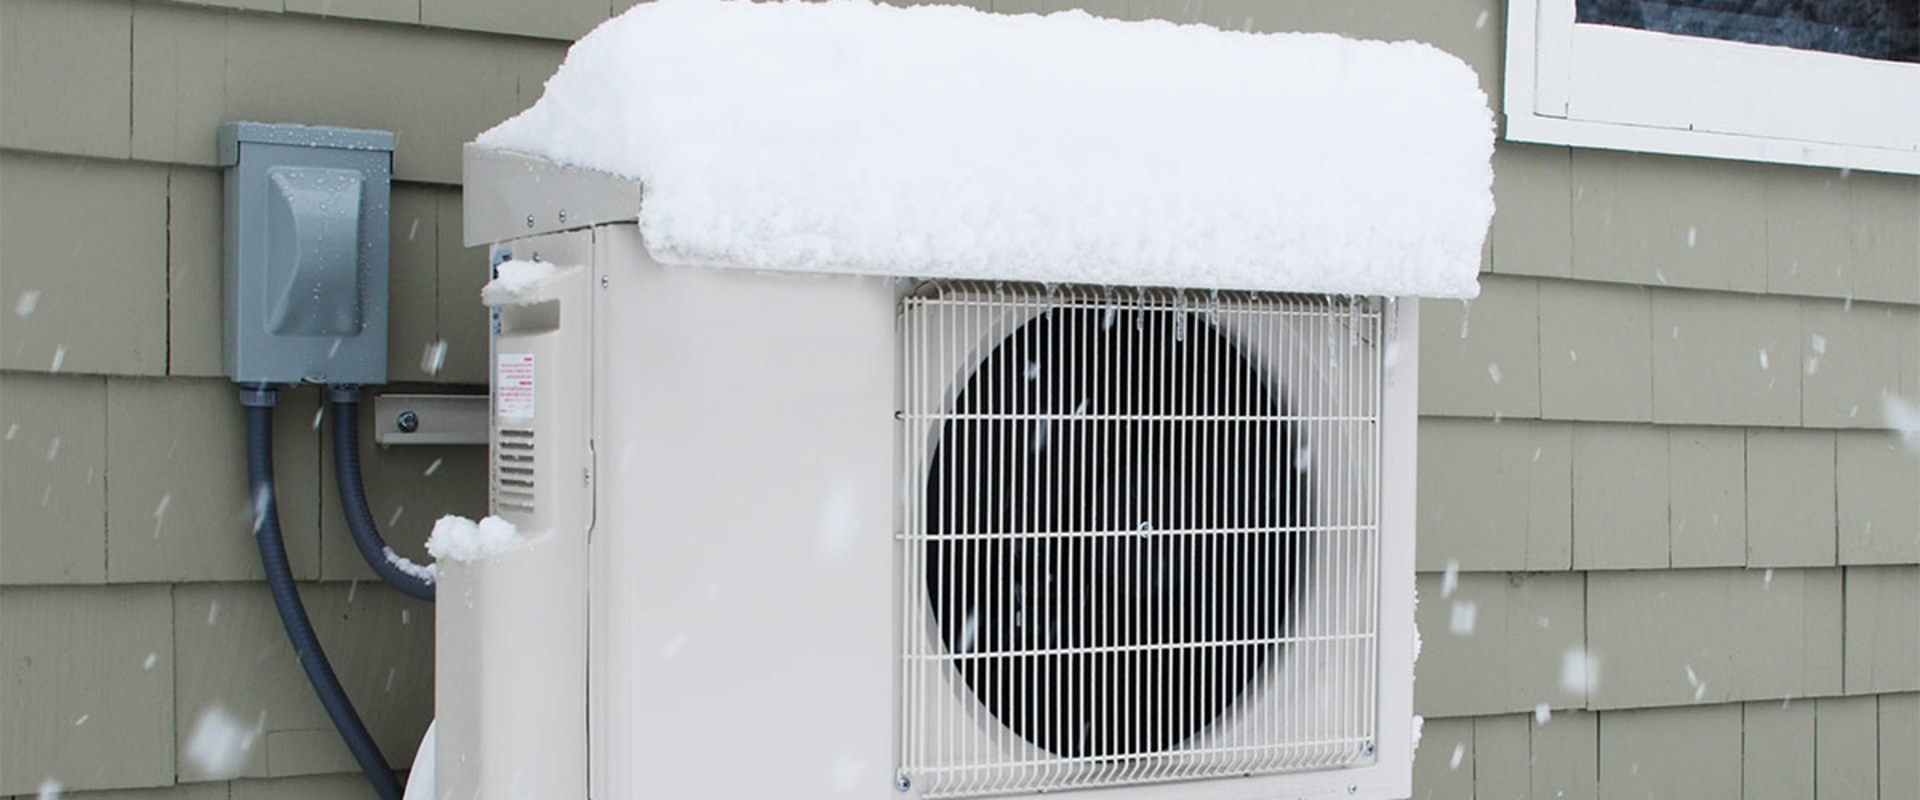 The Best Time to Purchase an HVAC System